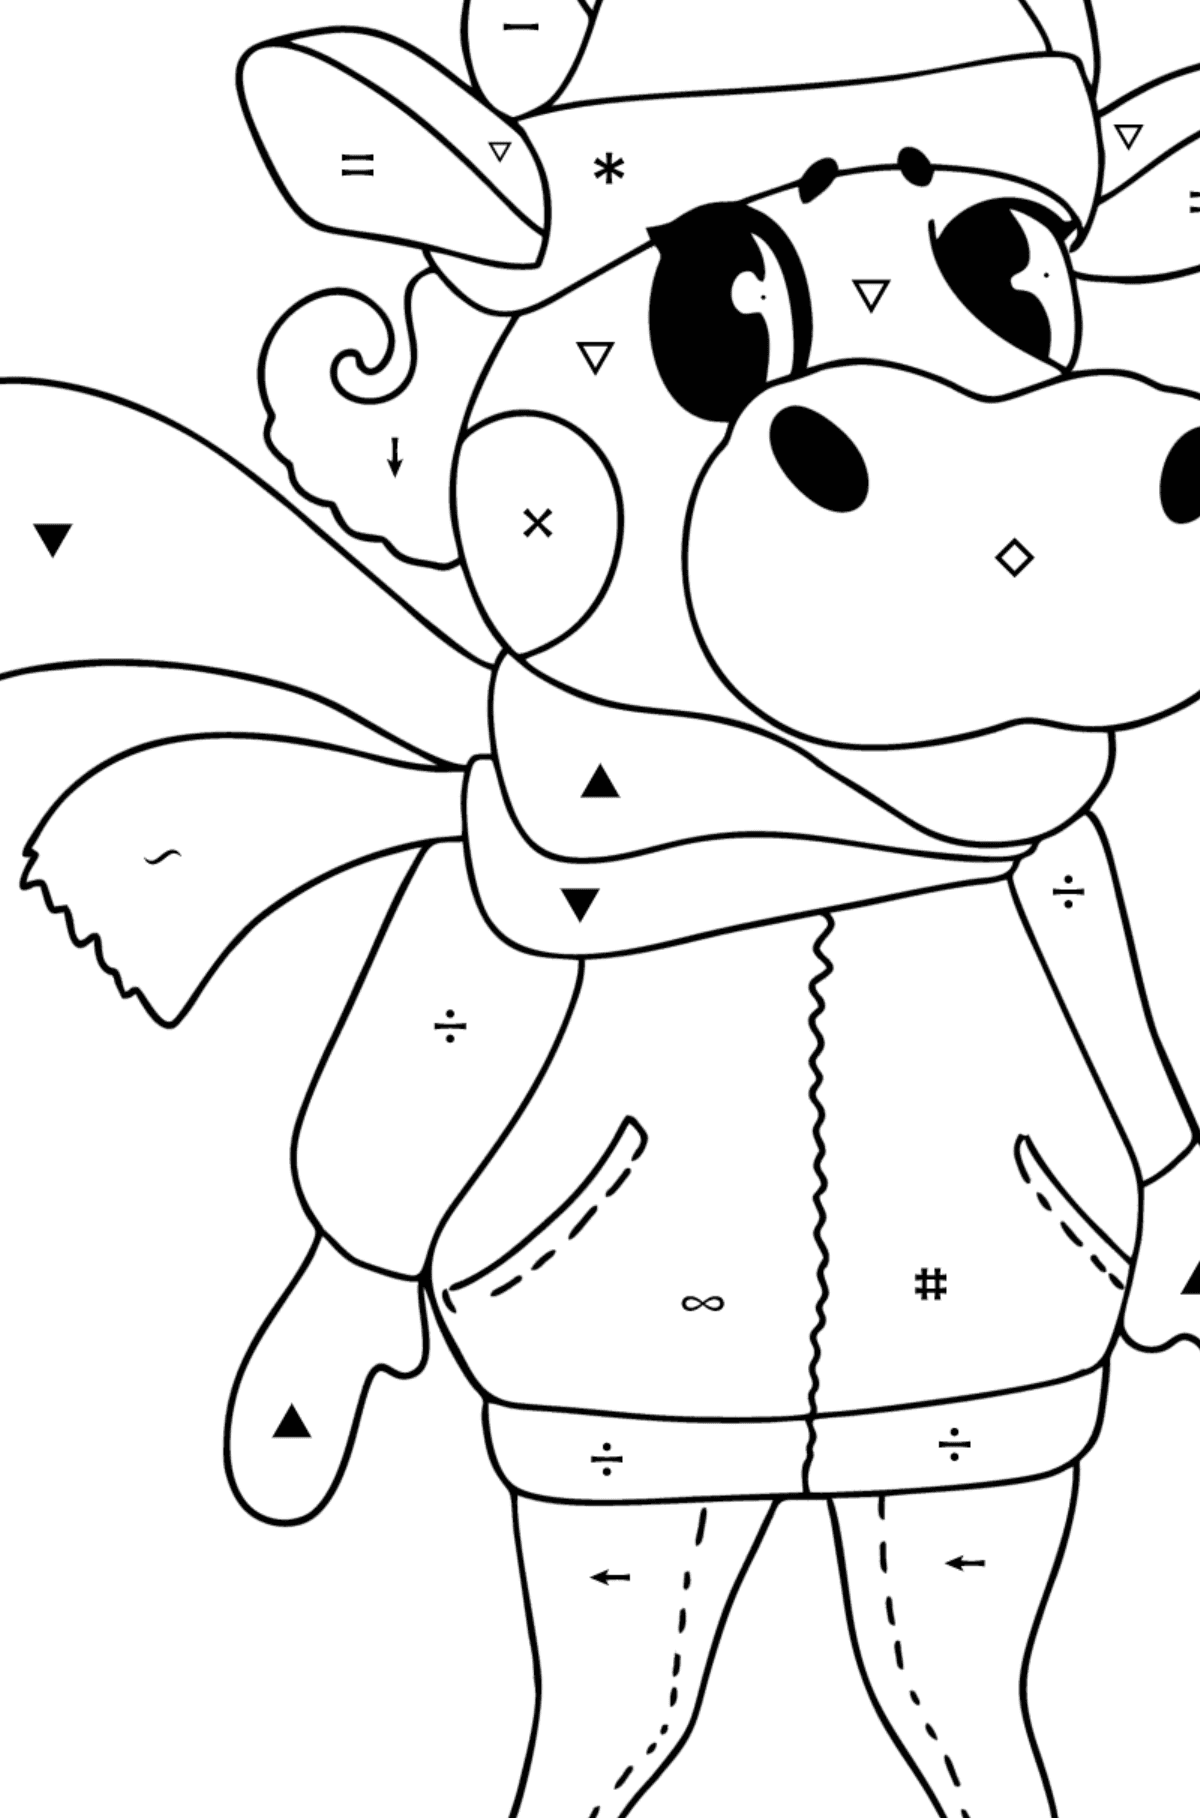 Kawaii cow coloring page - Coloring by Symbols for Kids